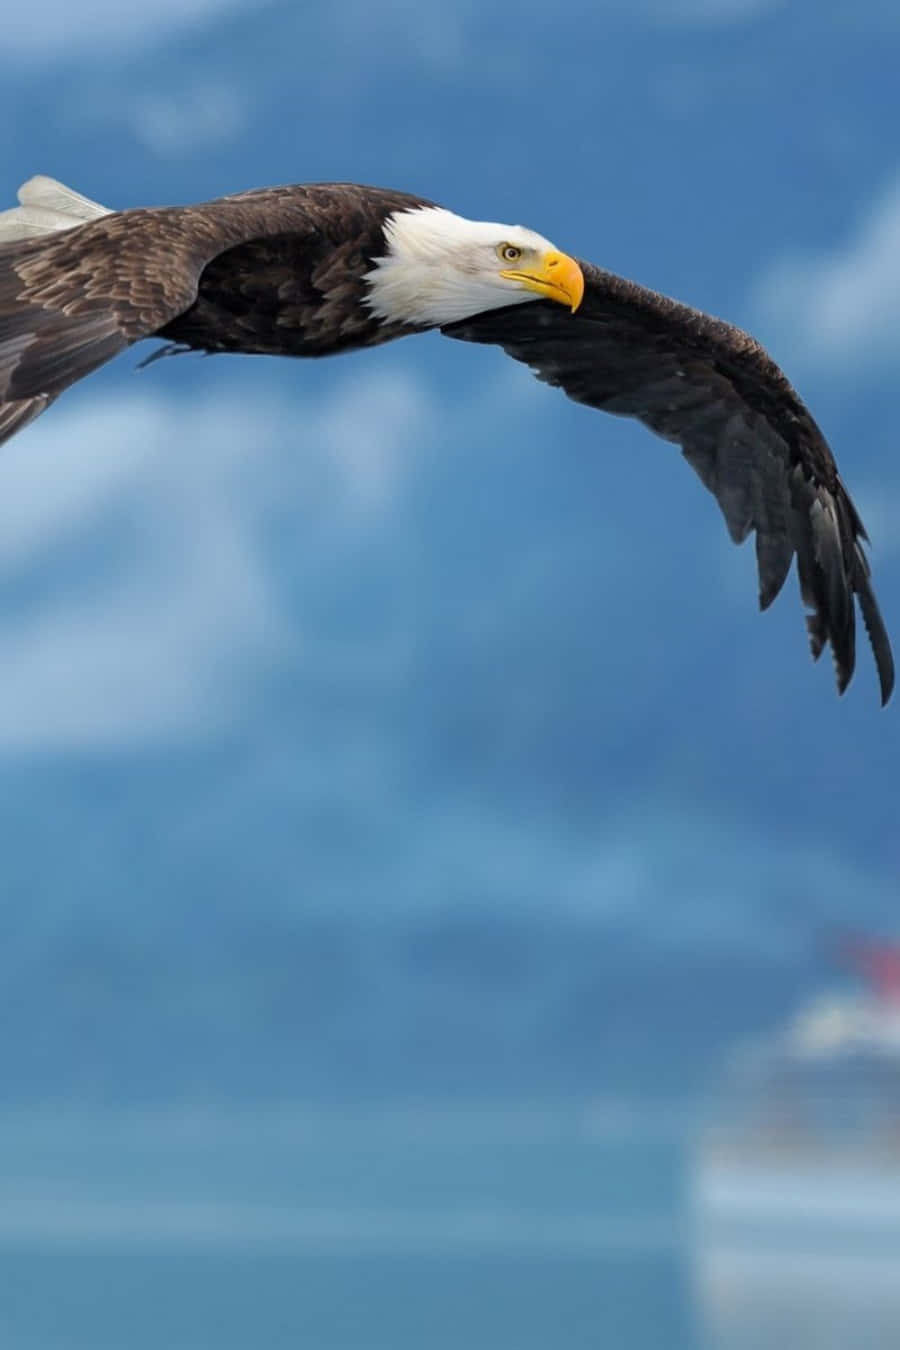 Capture Every Moment with the Eagle iPhone Wallpaper